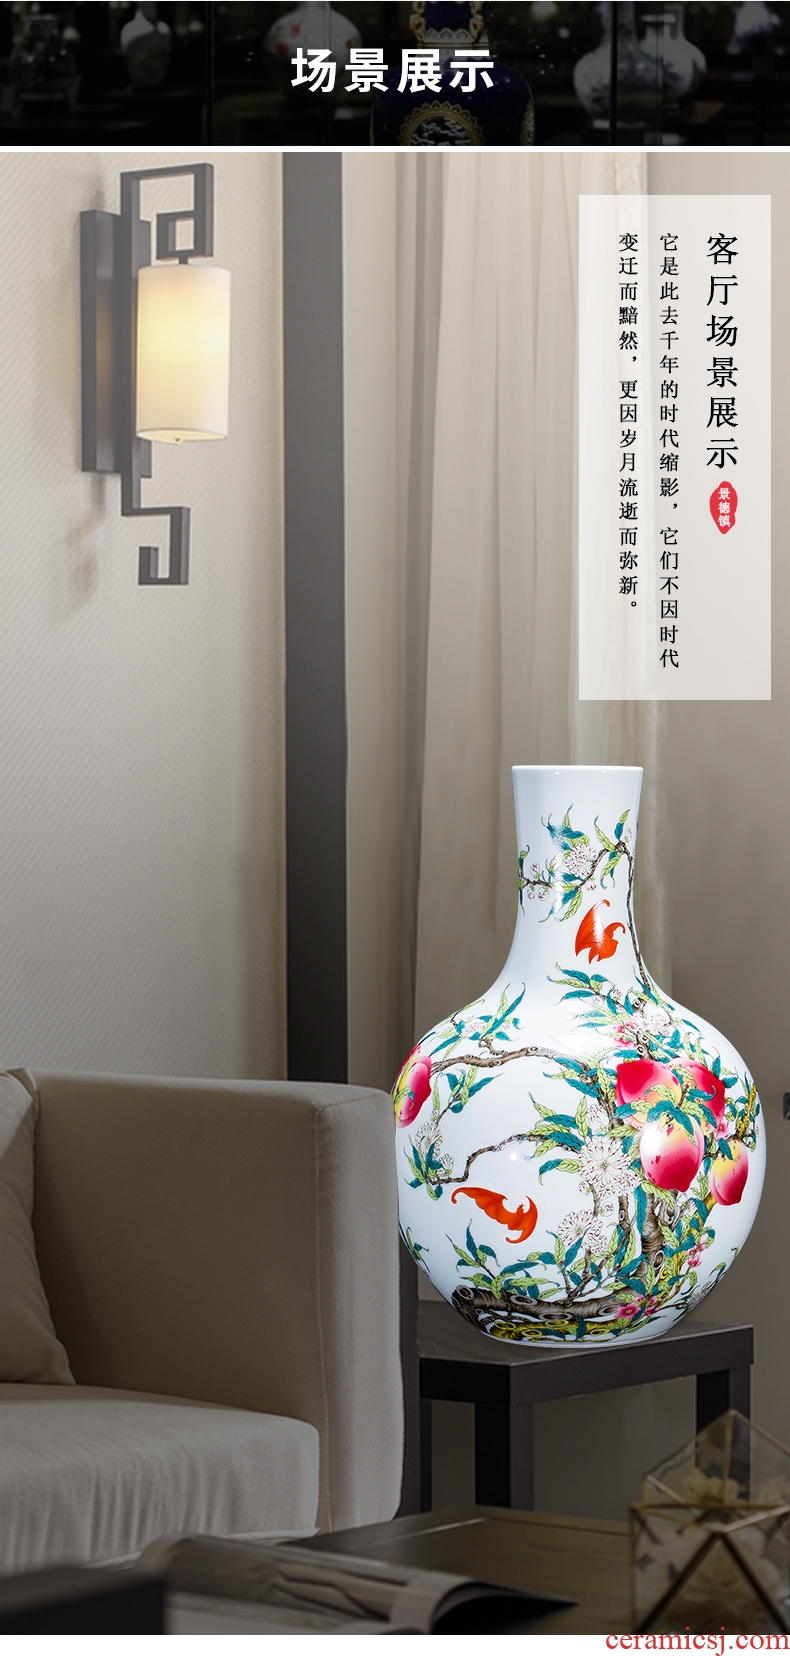 Jingdezhen ceramics antique vase furnishing articles sitting room porch Chinese style household adornment tree flower arranging arts and crafts